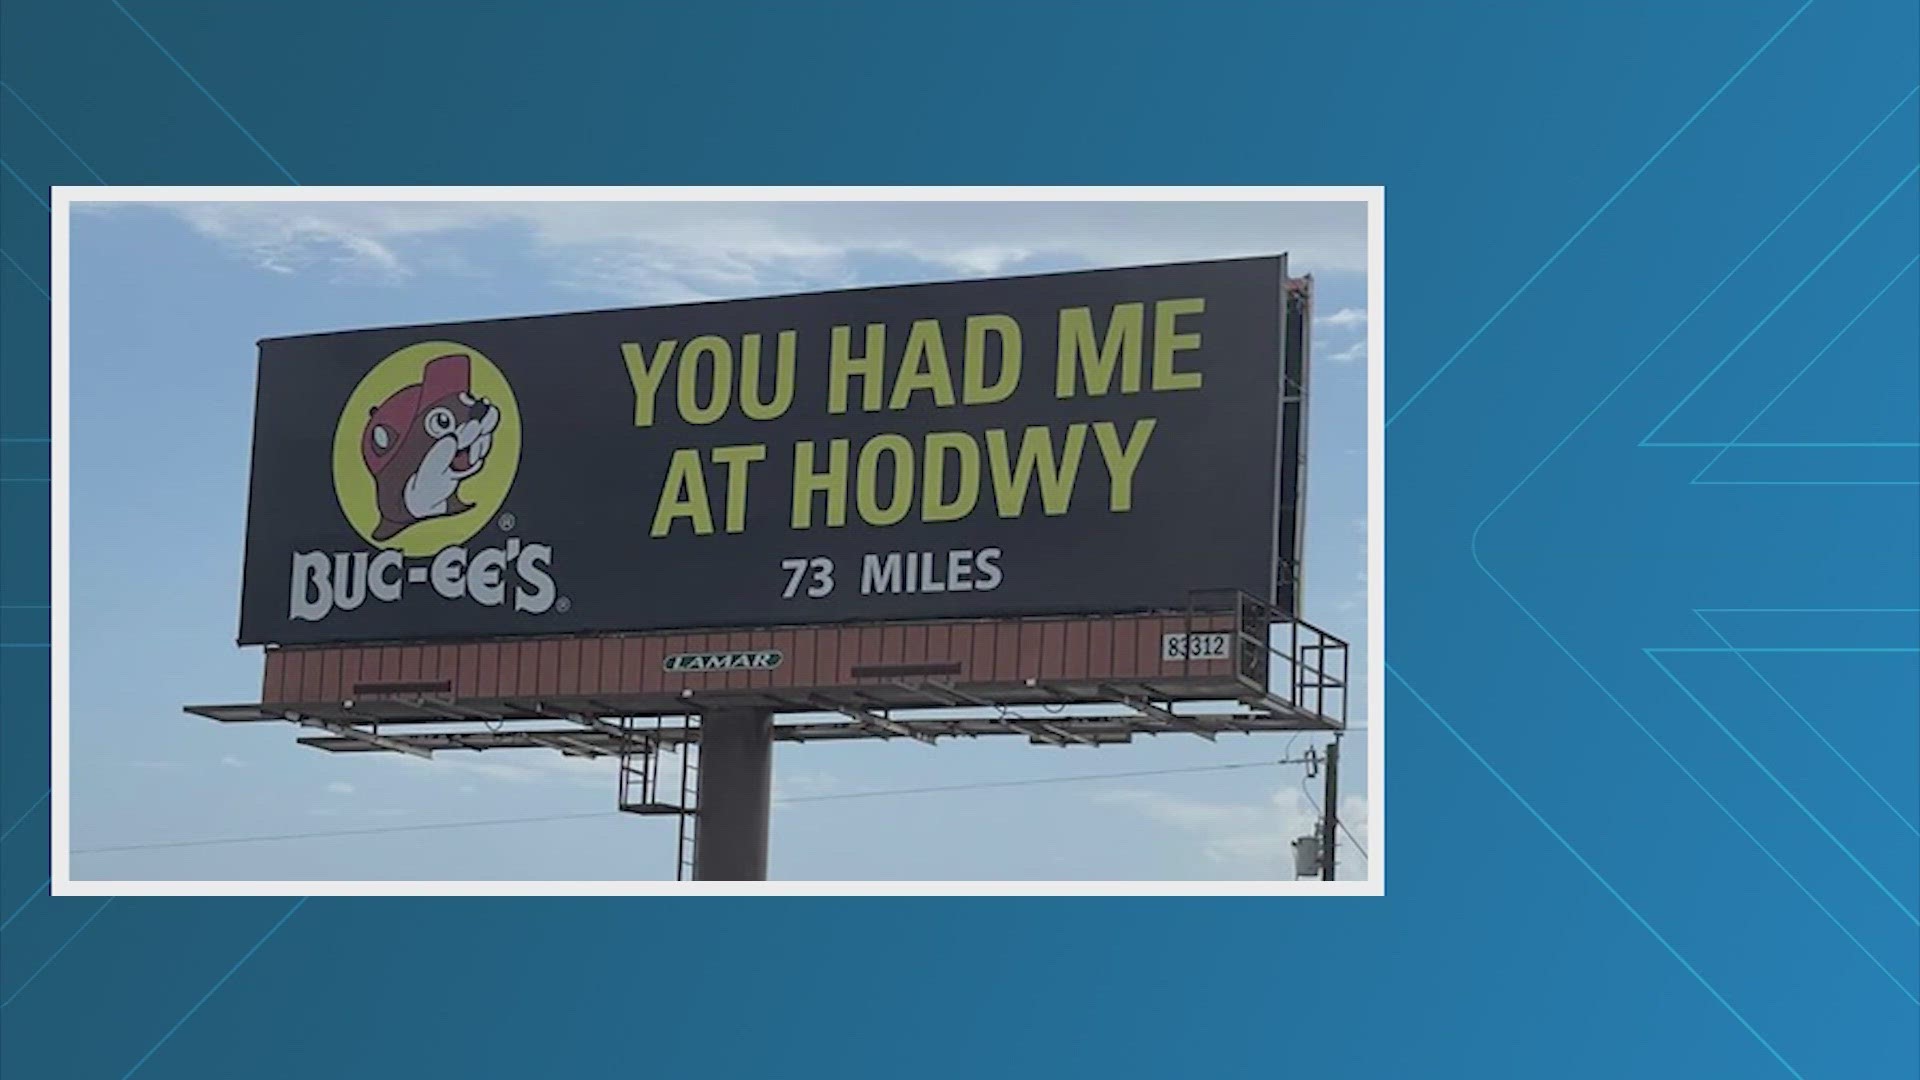 According to Buc-ee's, Hodwy is the southern way to blend the words "how did we" in order to talk faster.